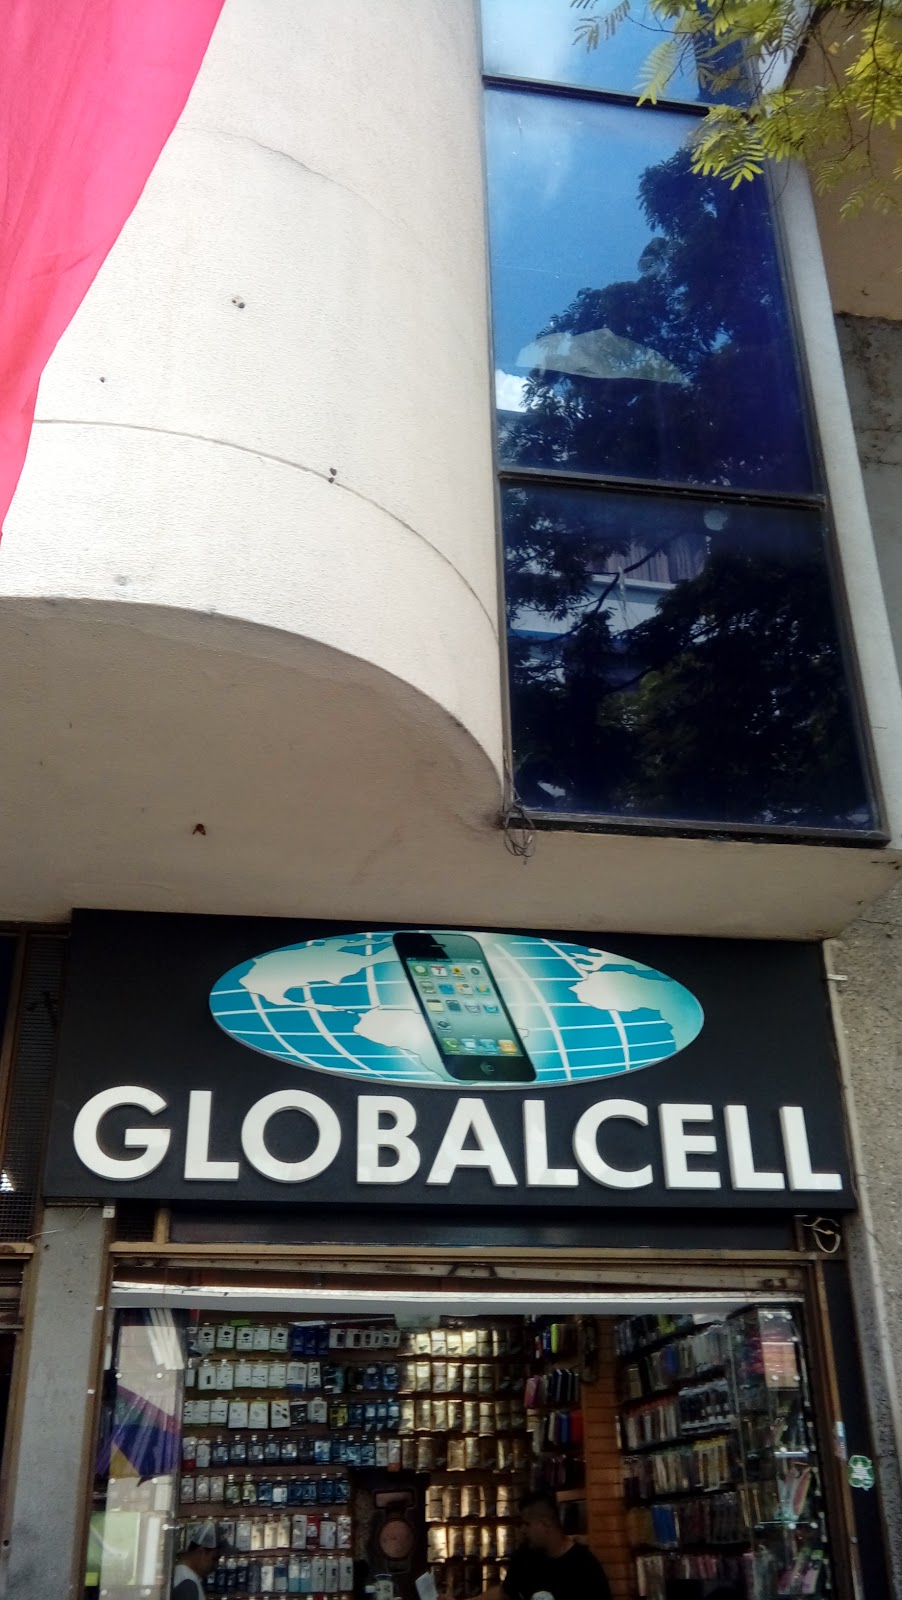 Globalcell